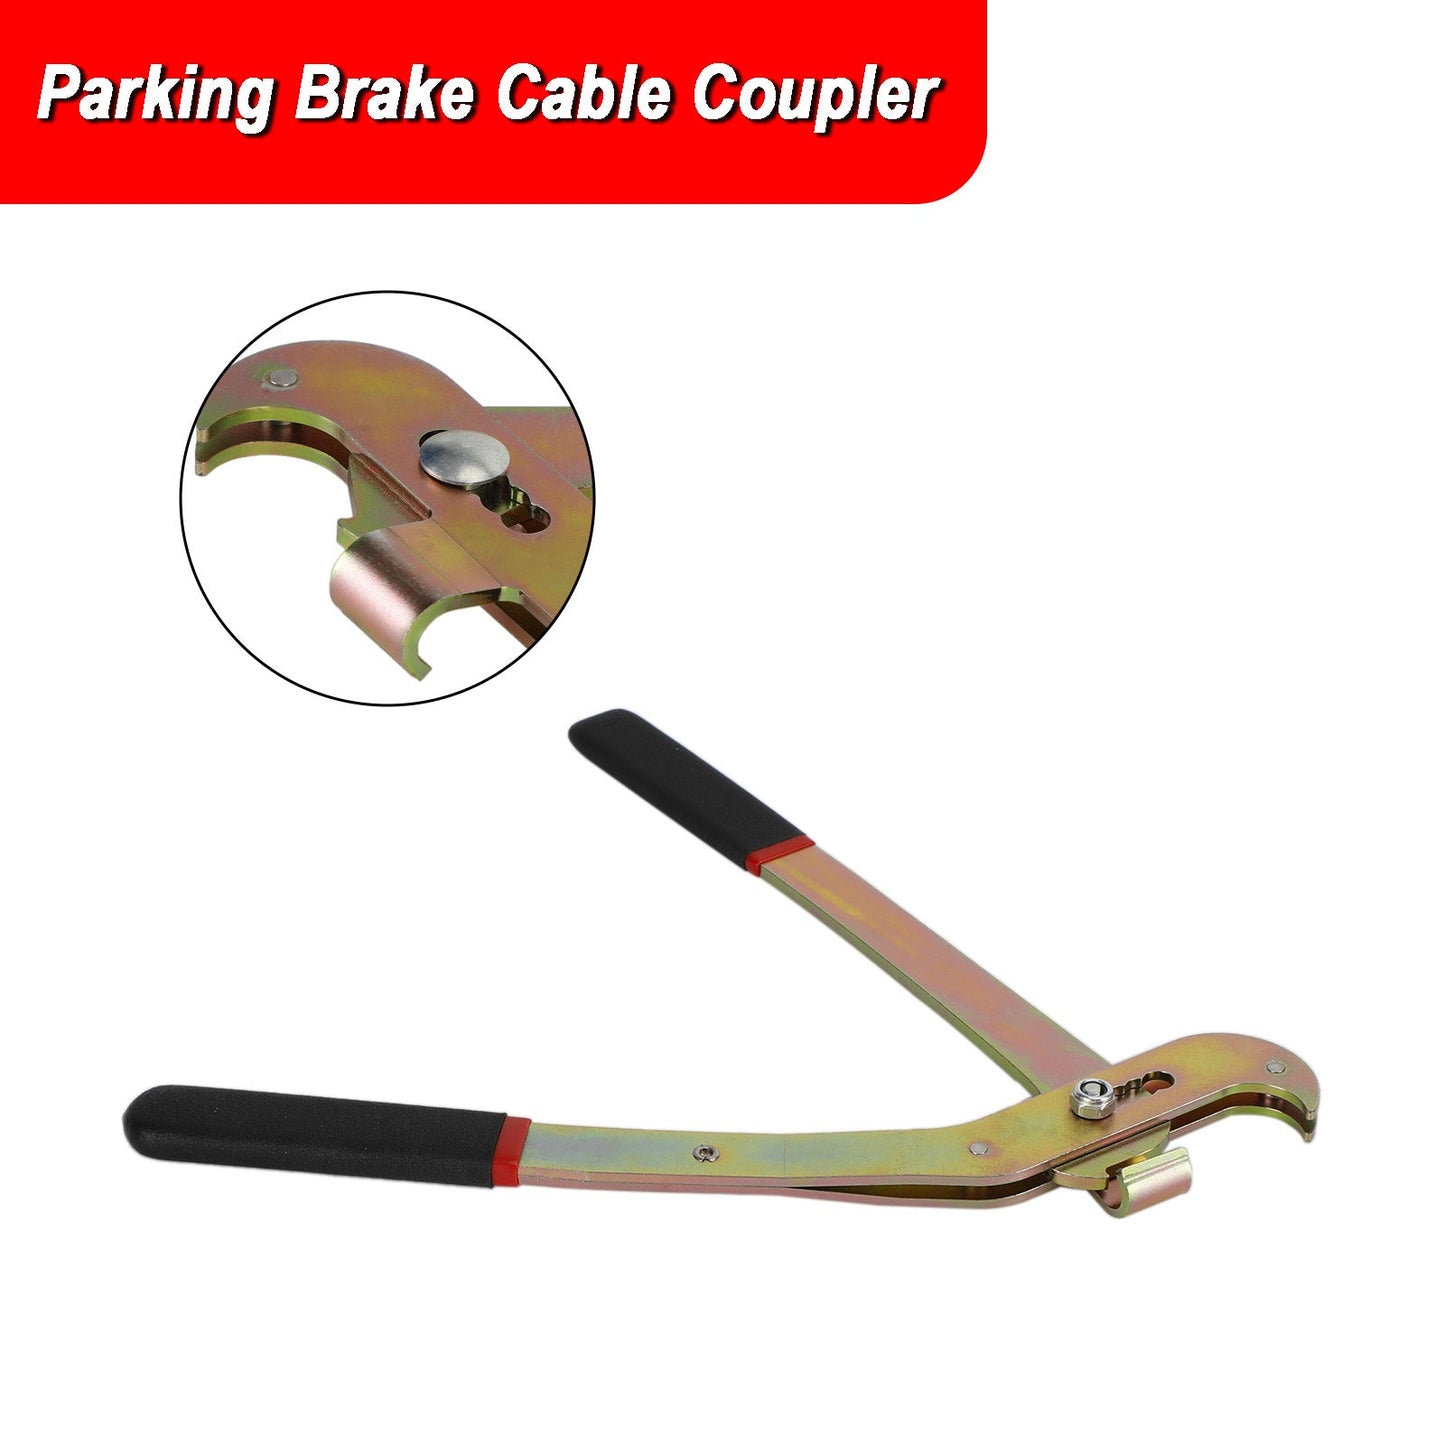 14 inch Parking Brake Cable Coupler Removal Tool 10500